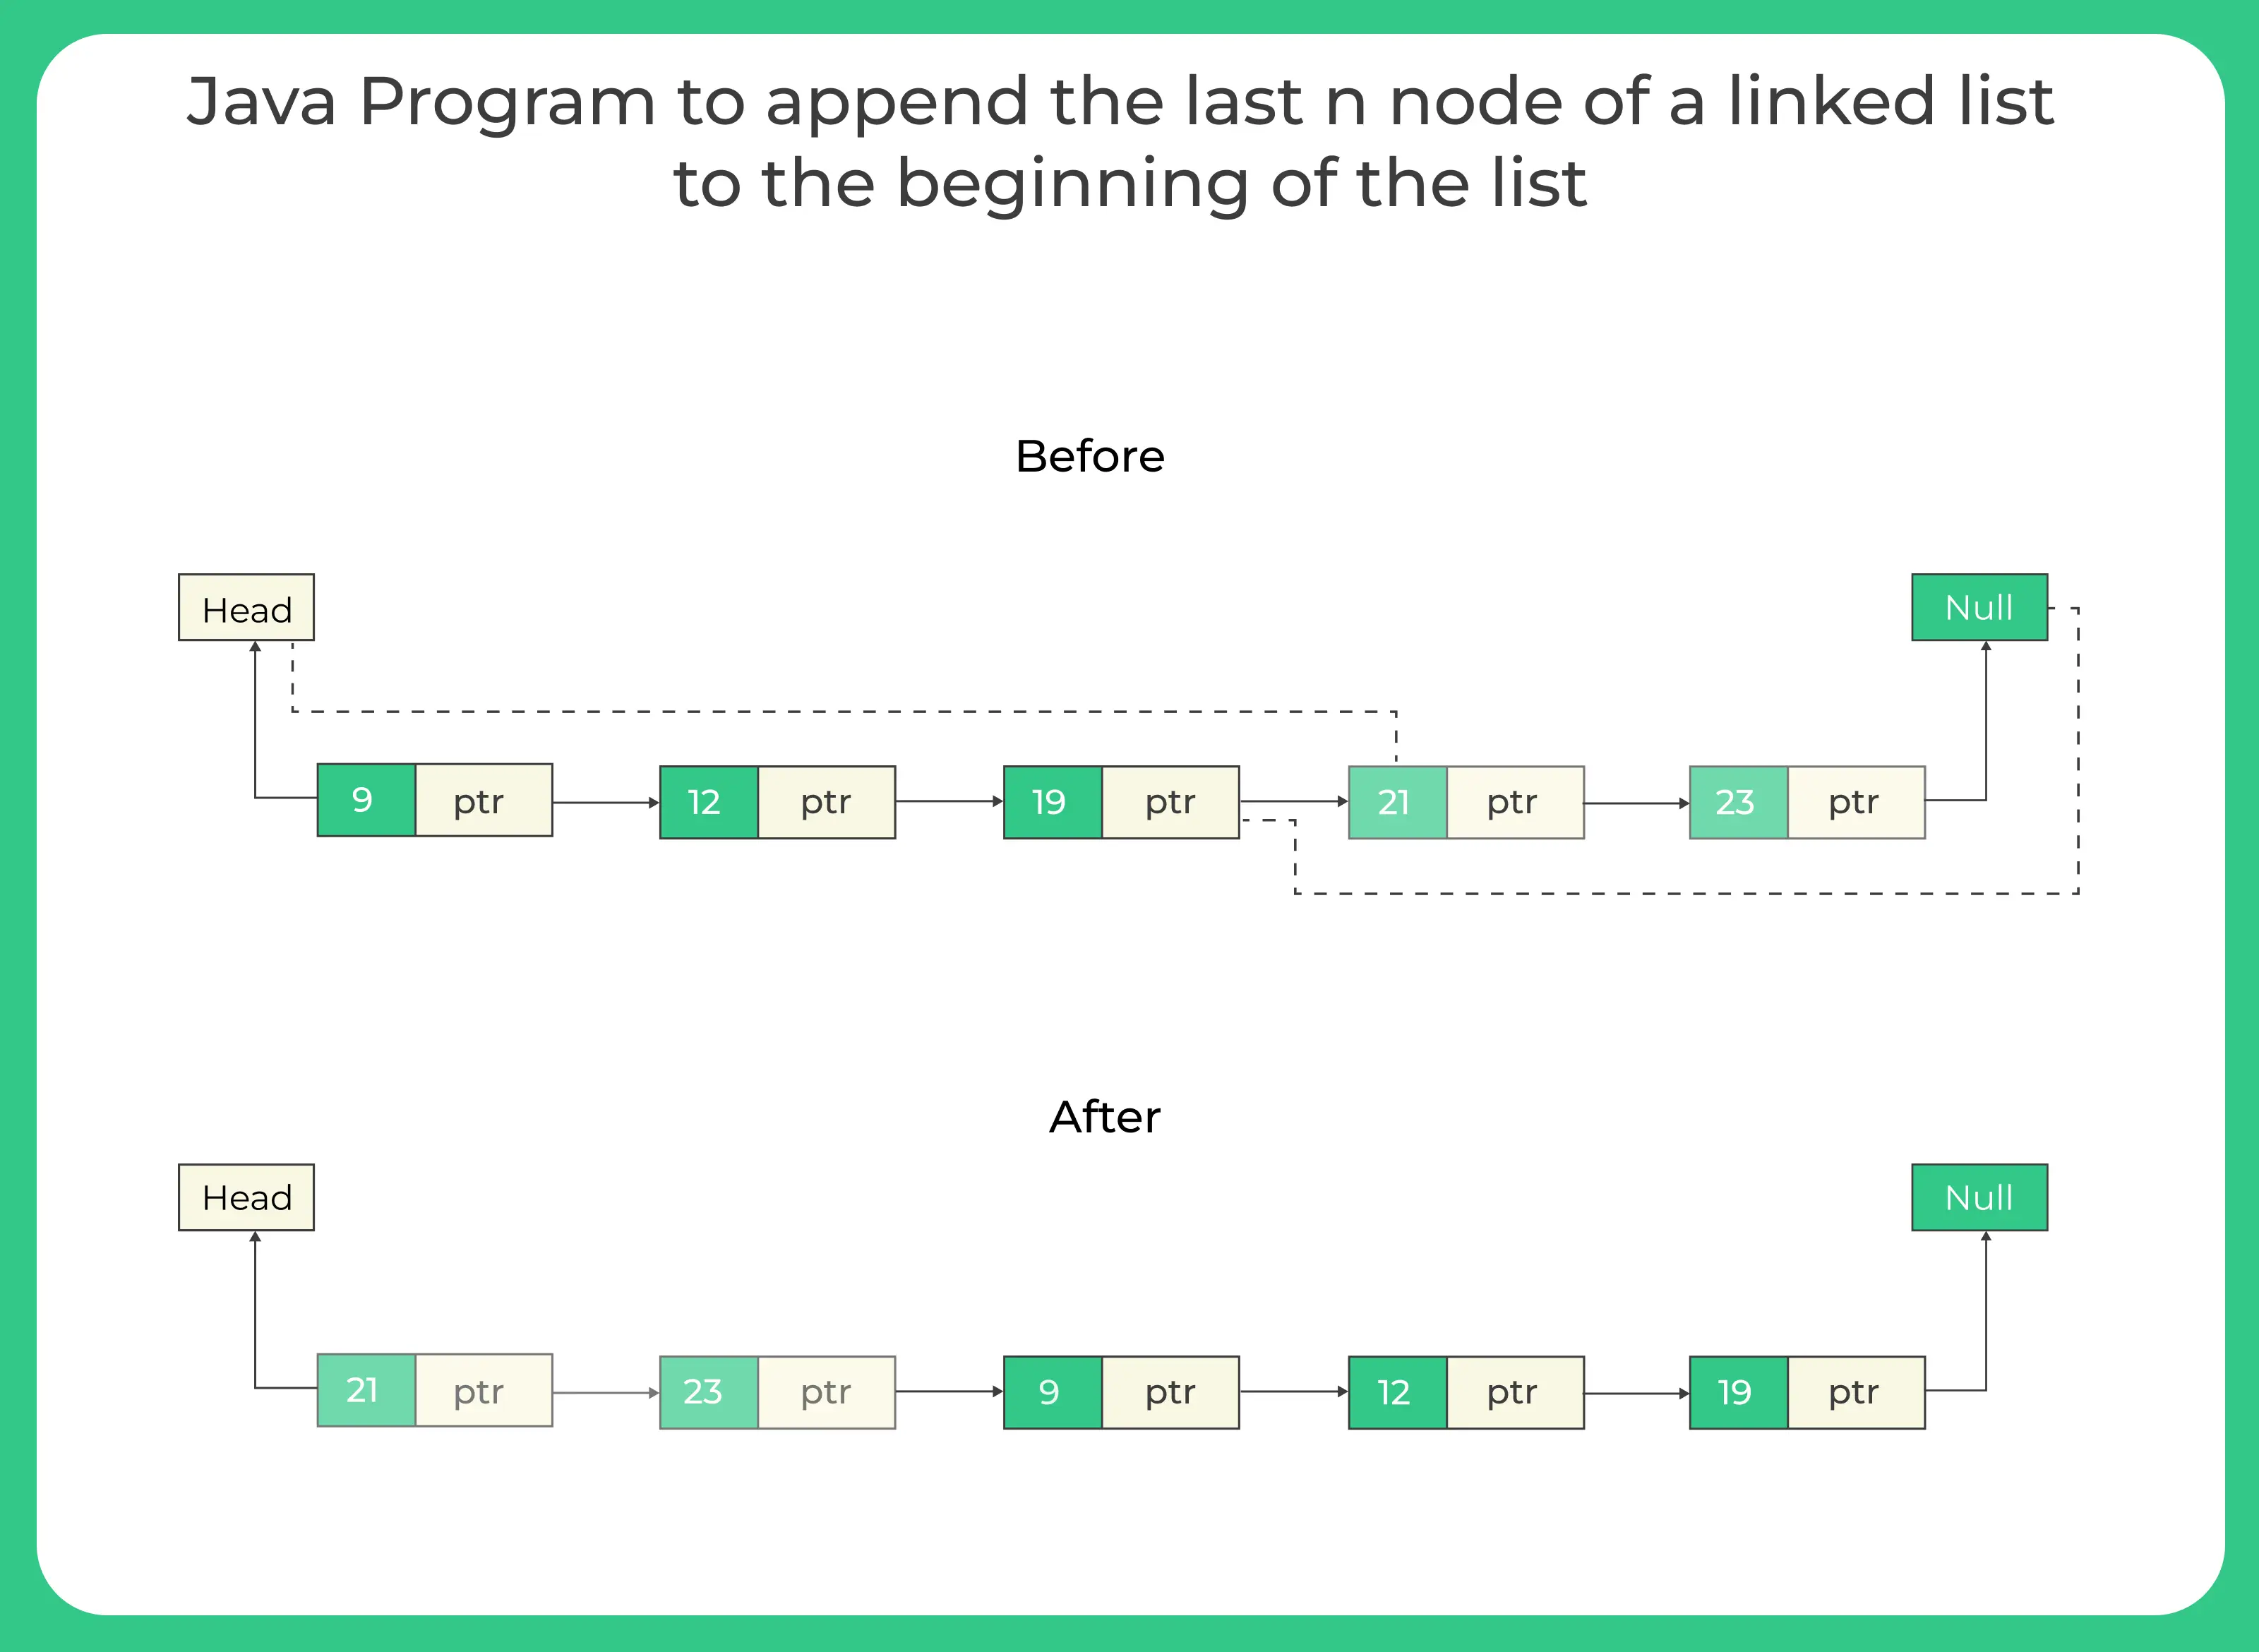 Append the last n node of a linked list to the beginning of the list